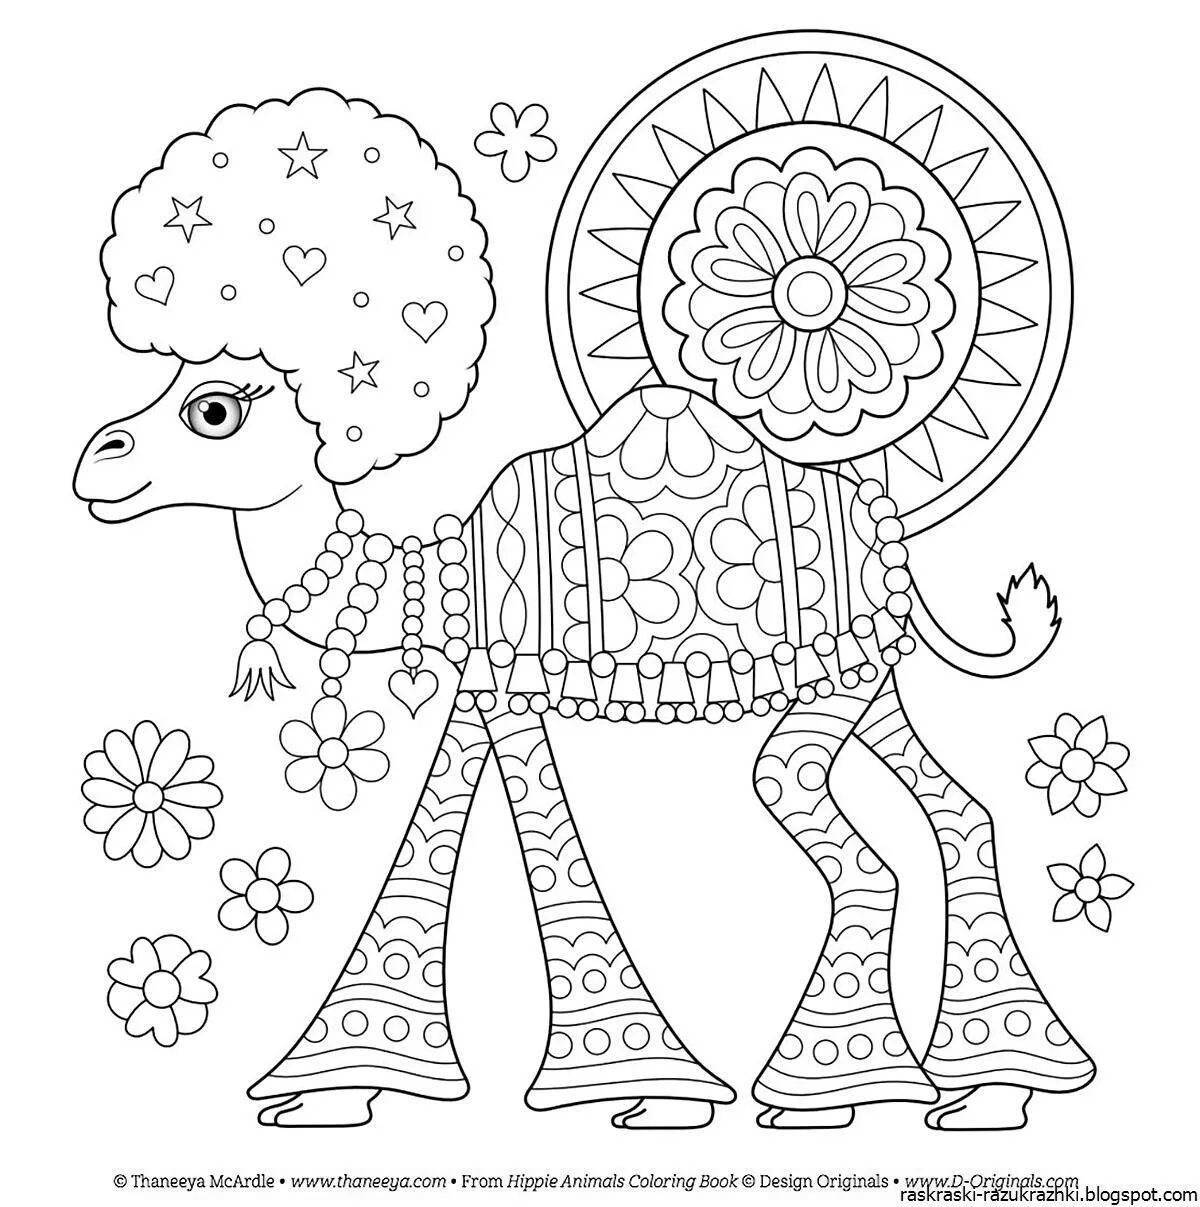 Bright anti-stress coloring book for children 4-5 years old